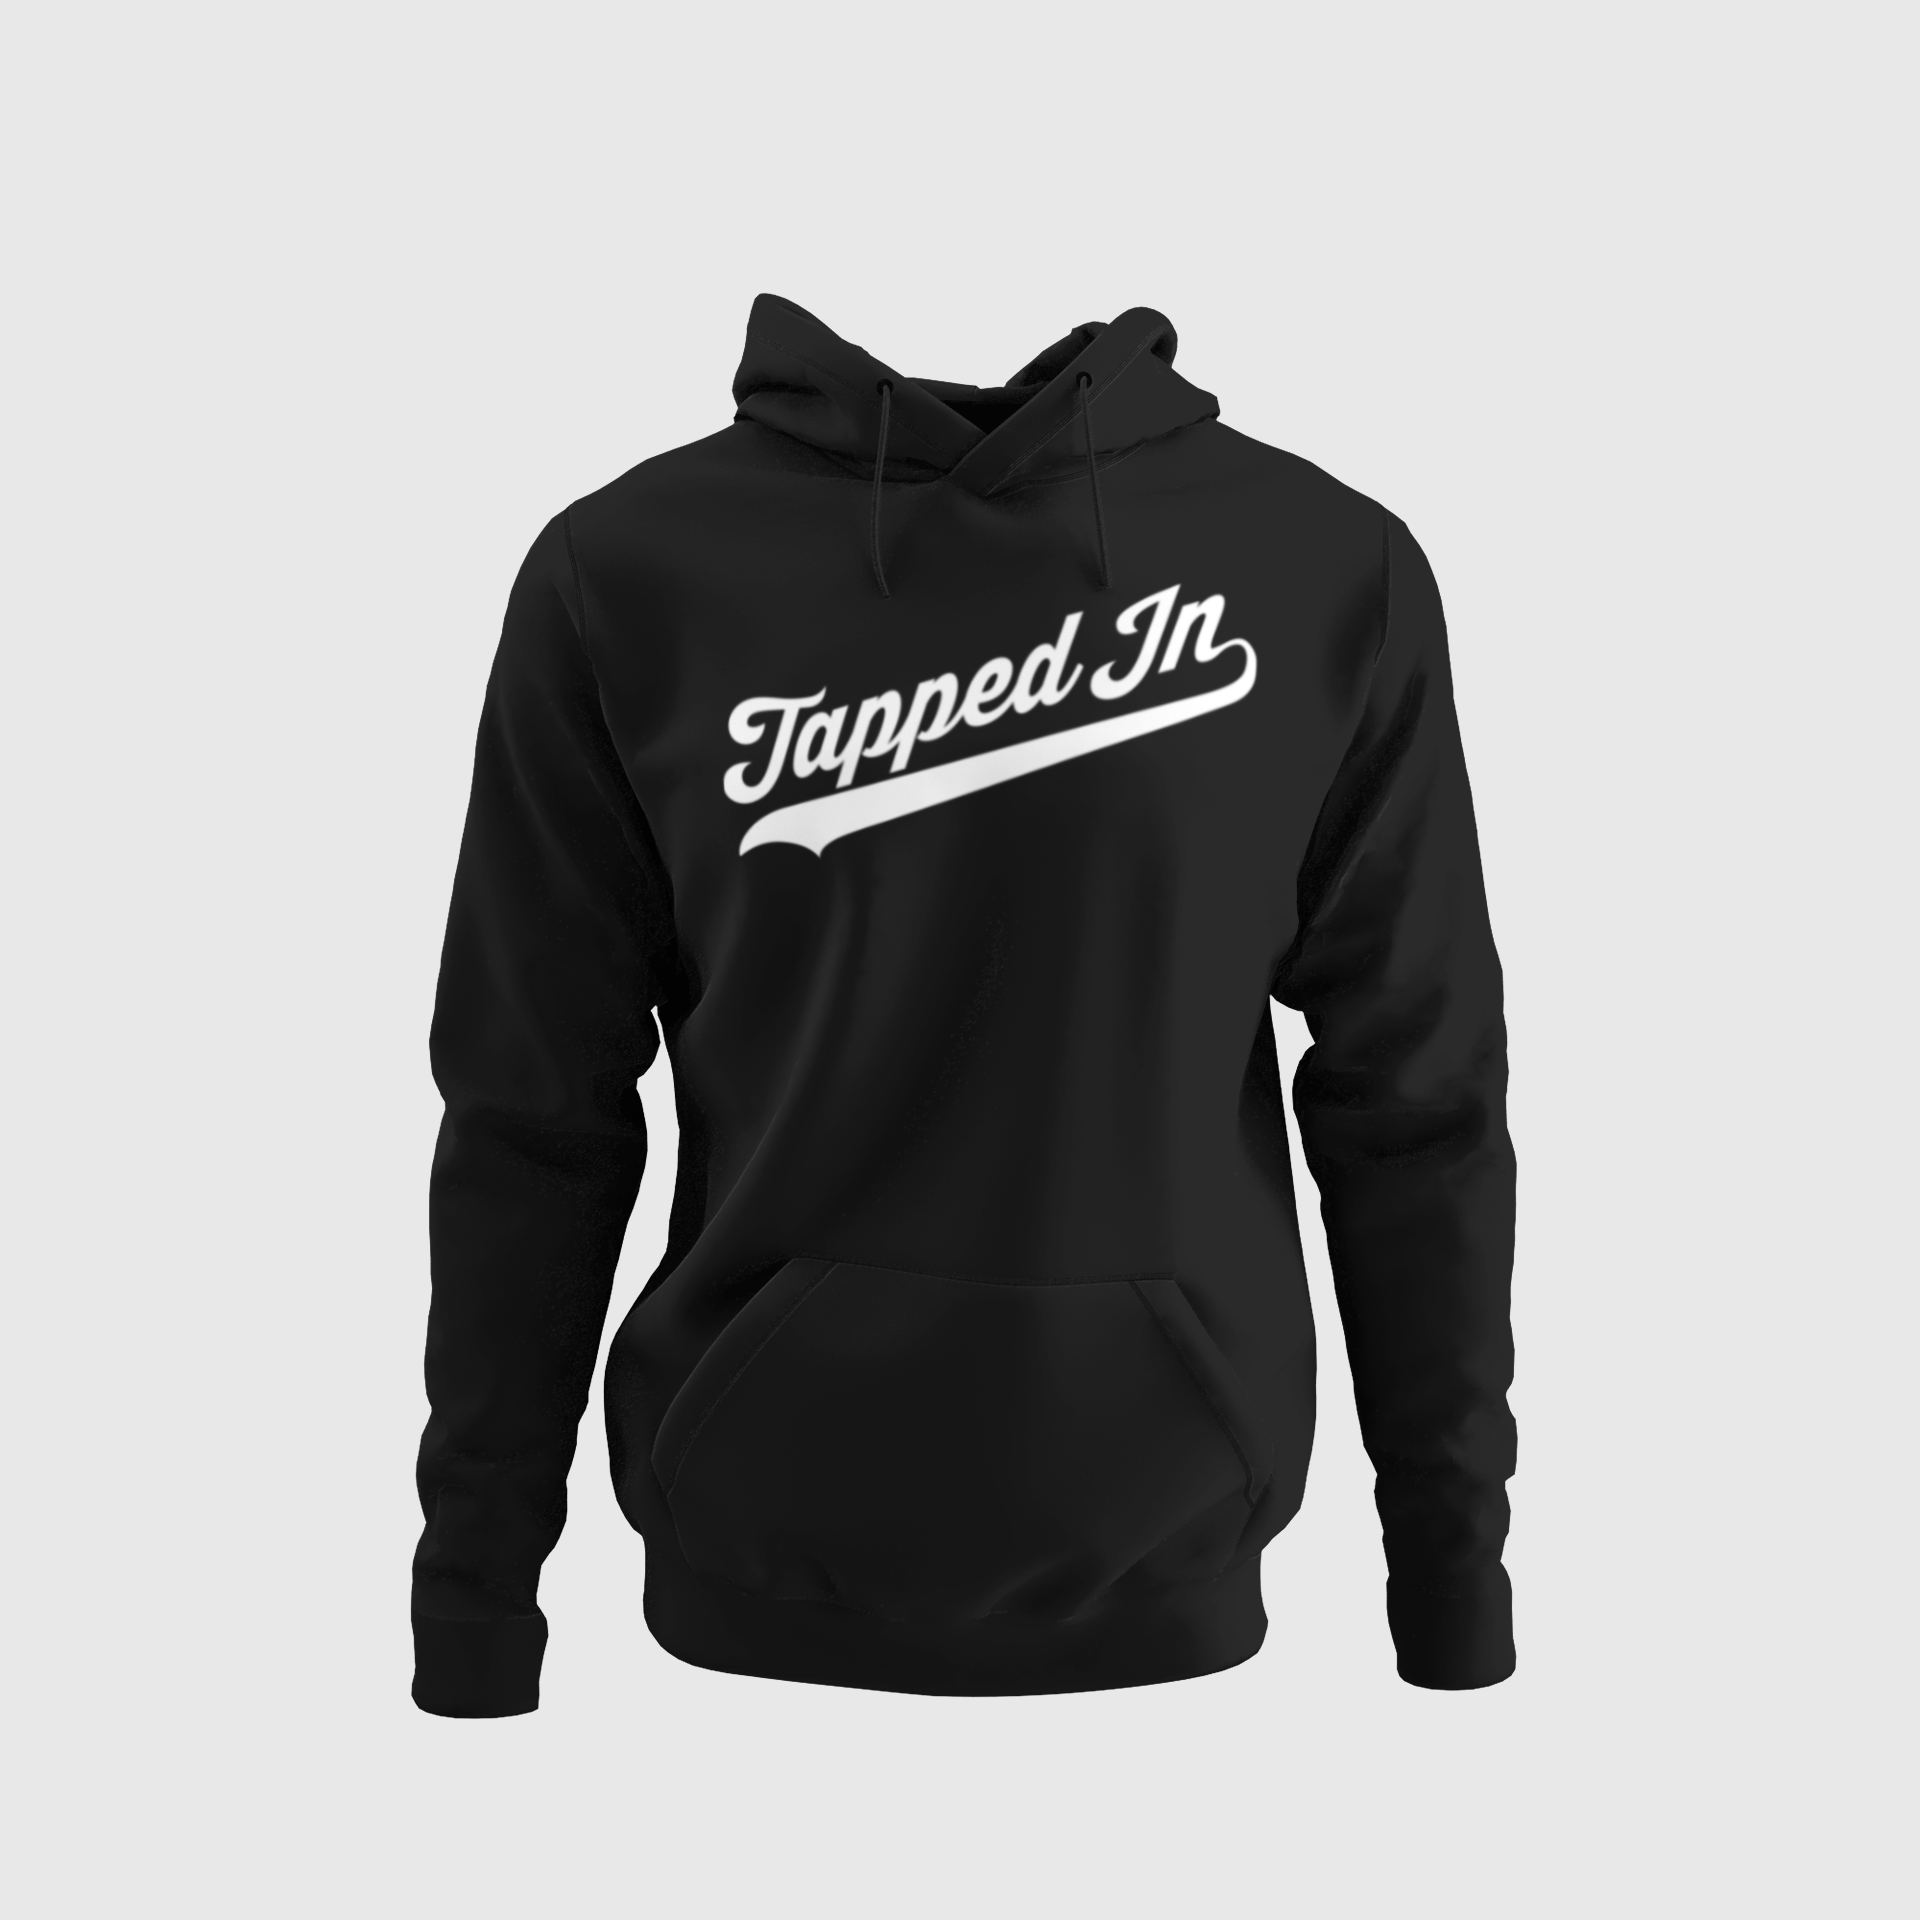 Tapped In Hoodie